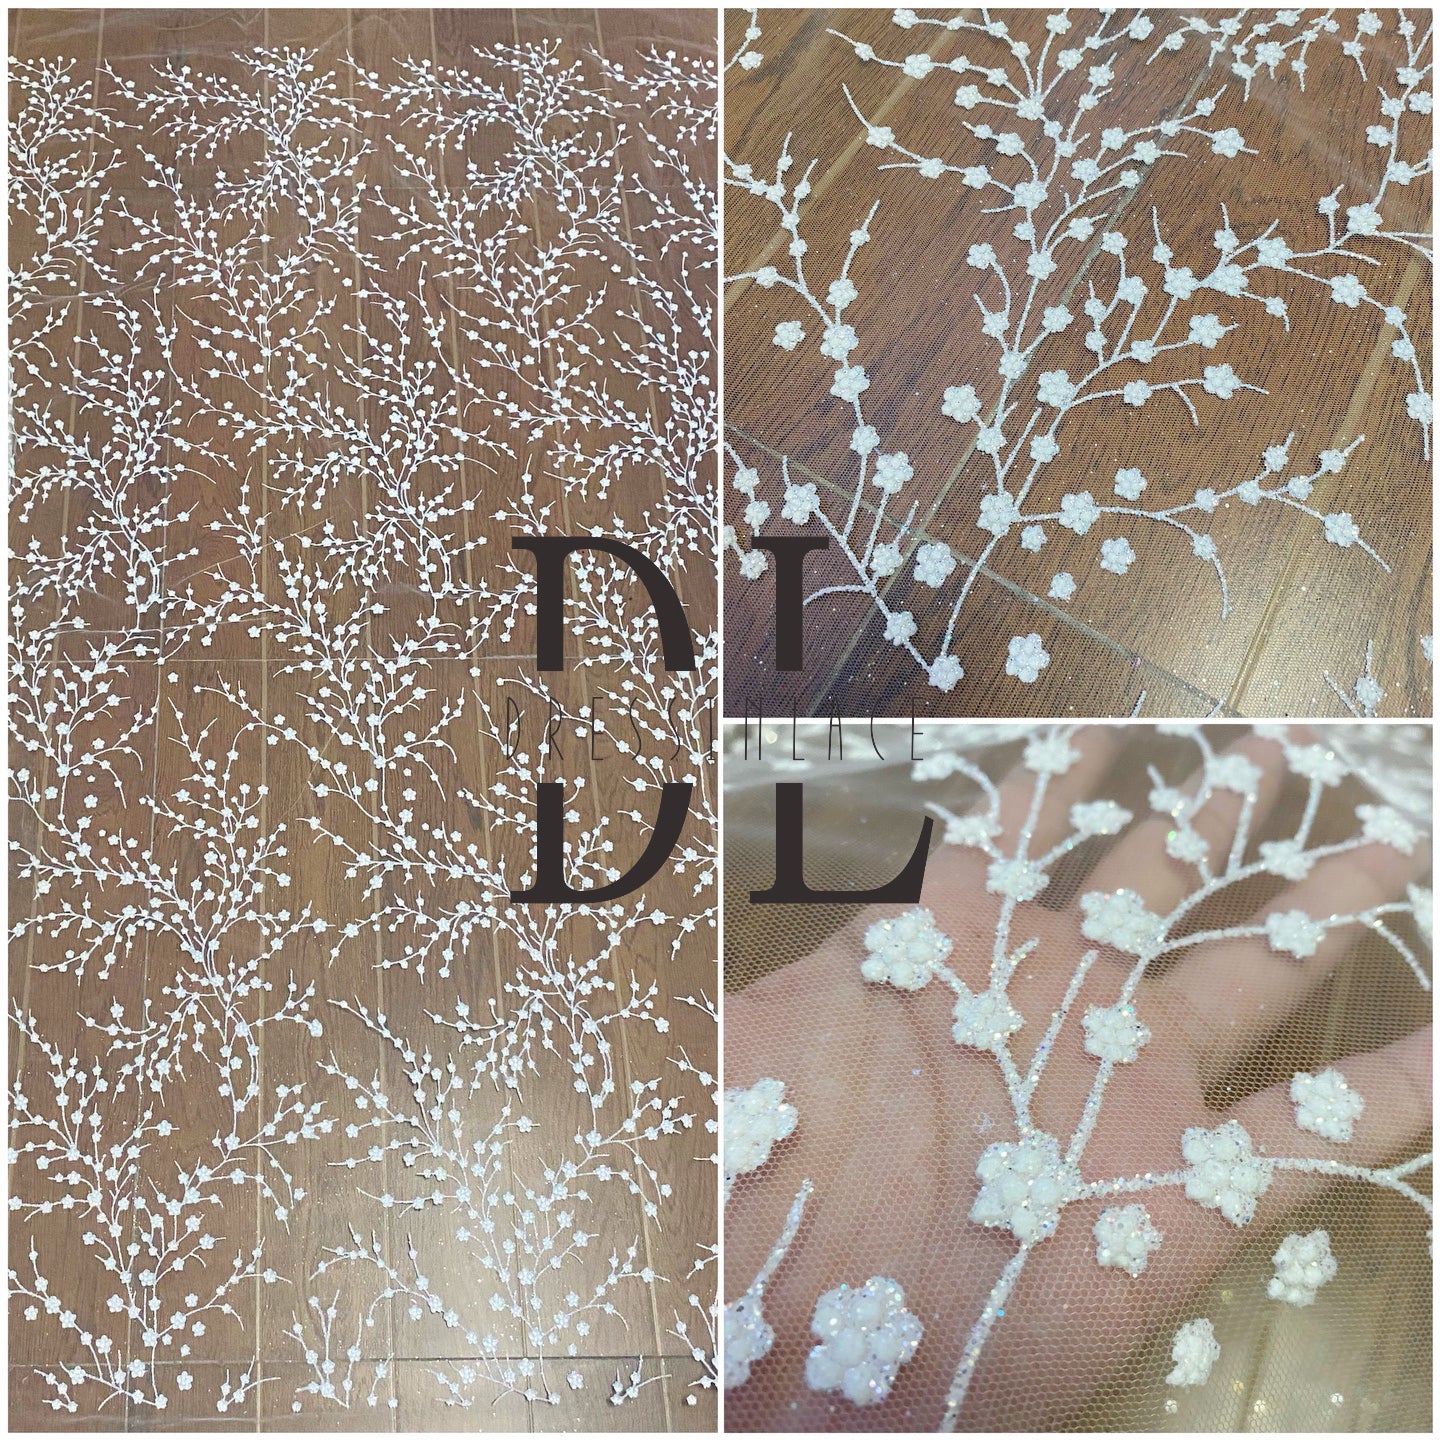 DL130058 High-quality Shiny glitter flowers lace fabric for Bridal wedding dresses width 130cm